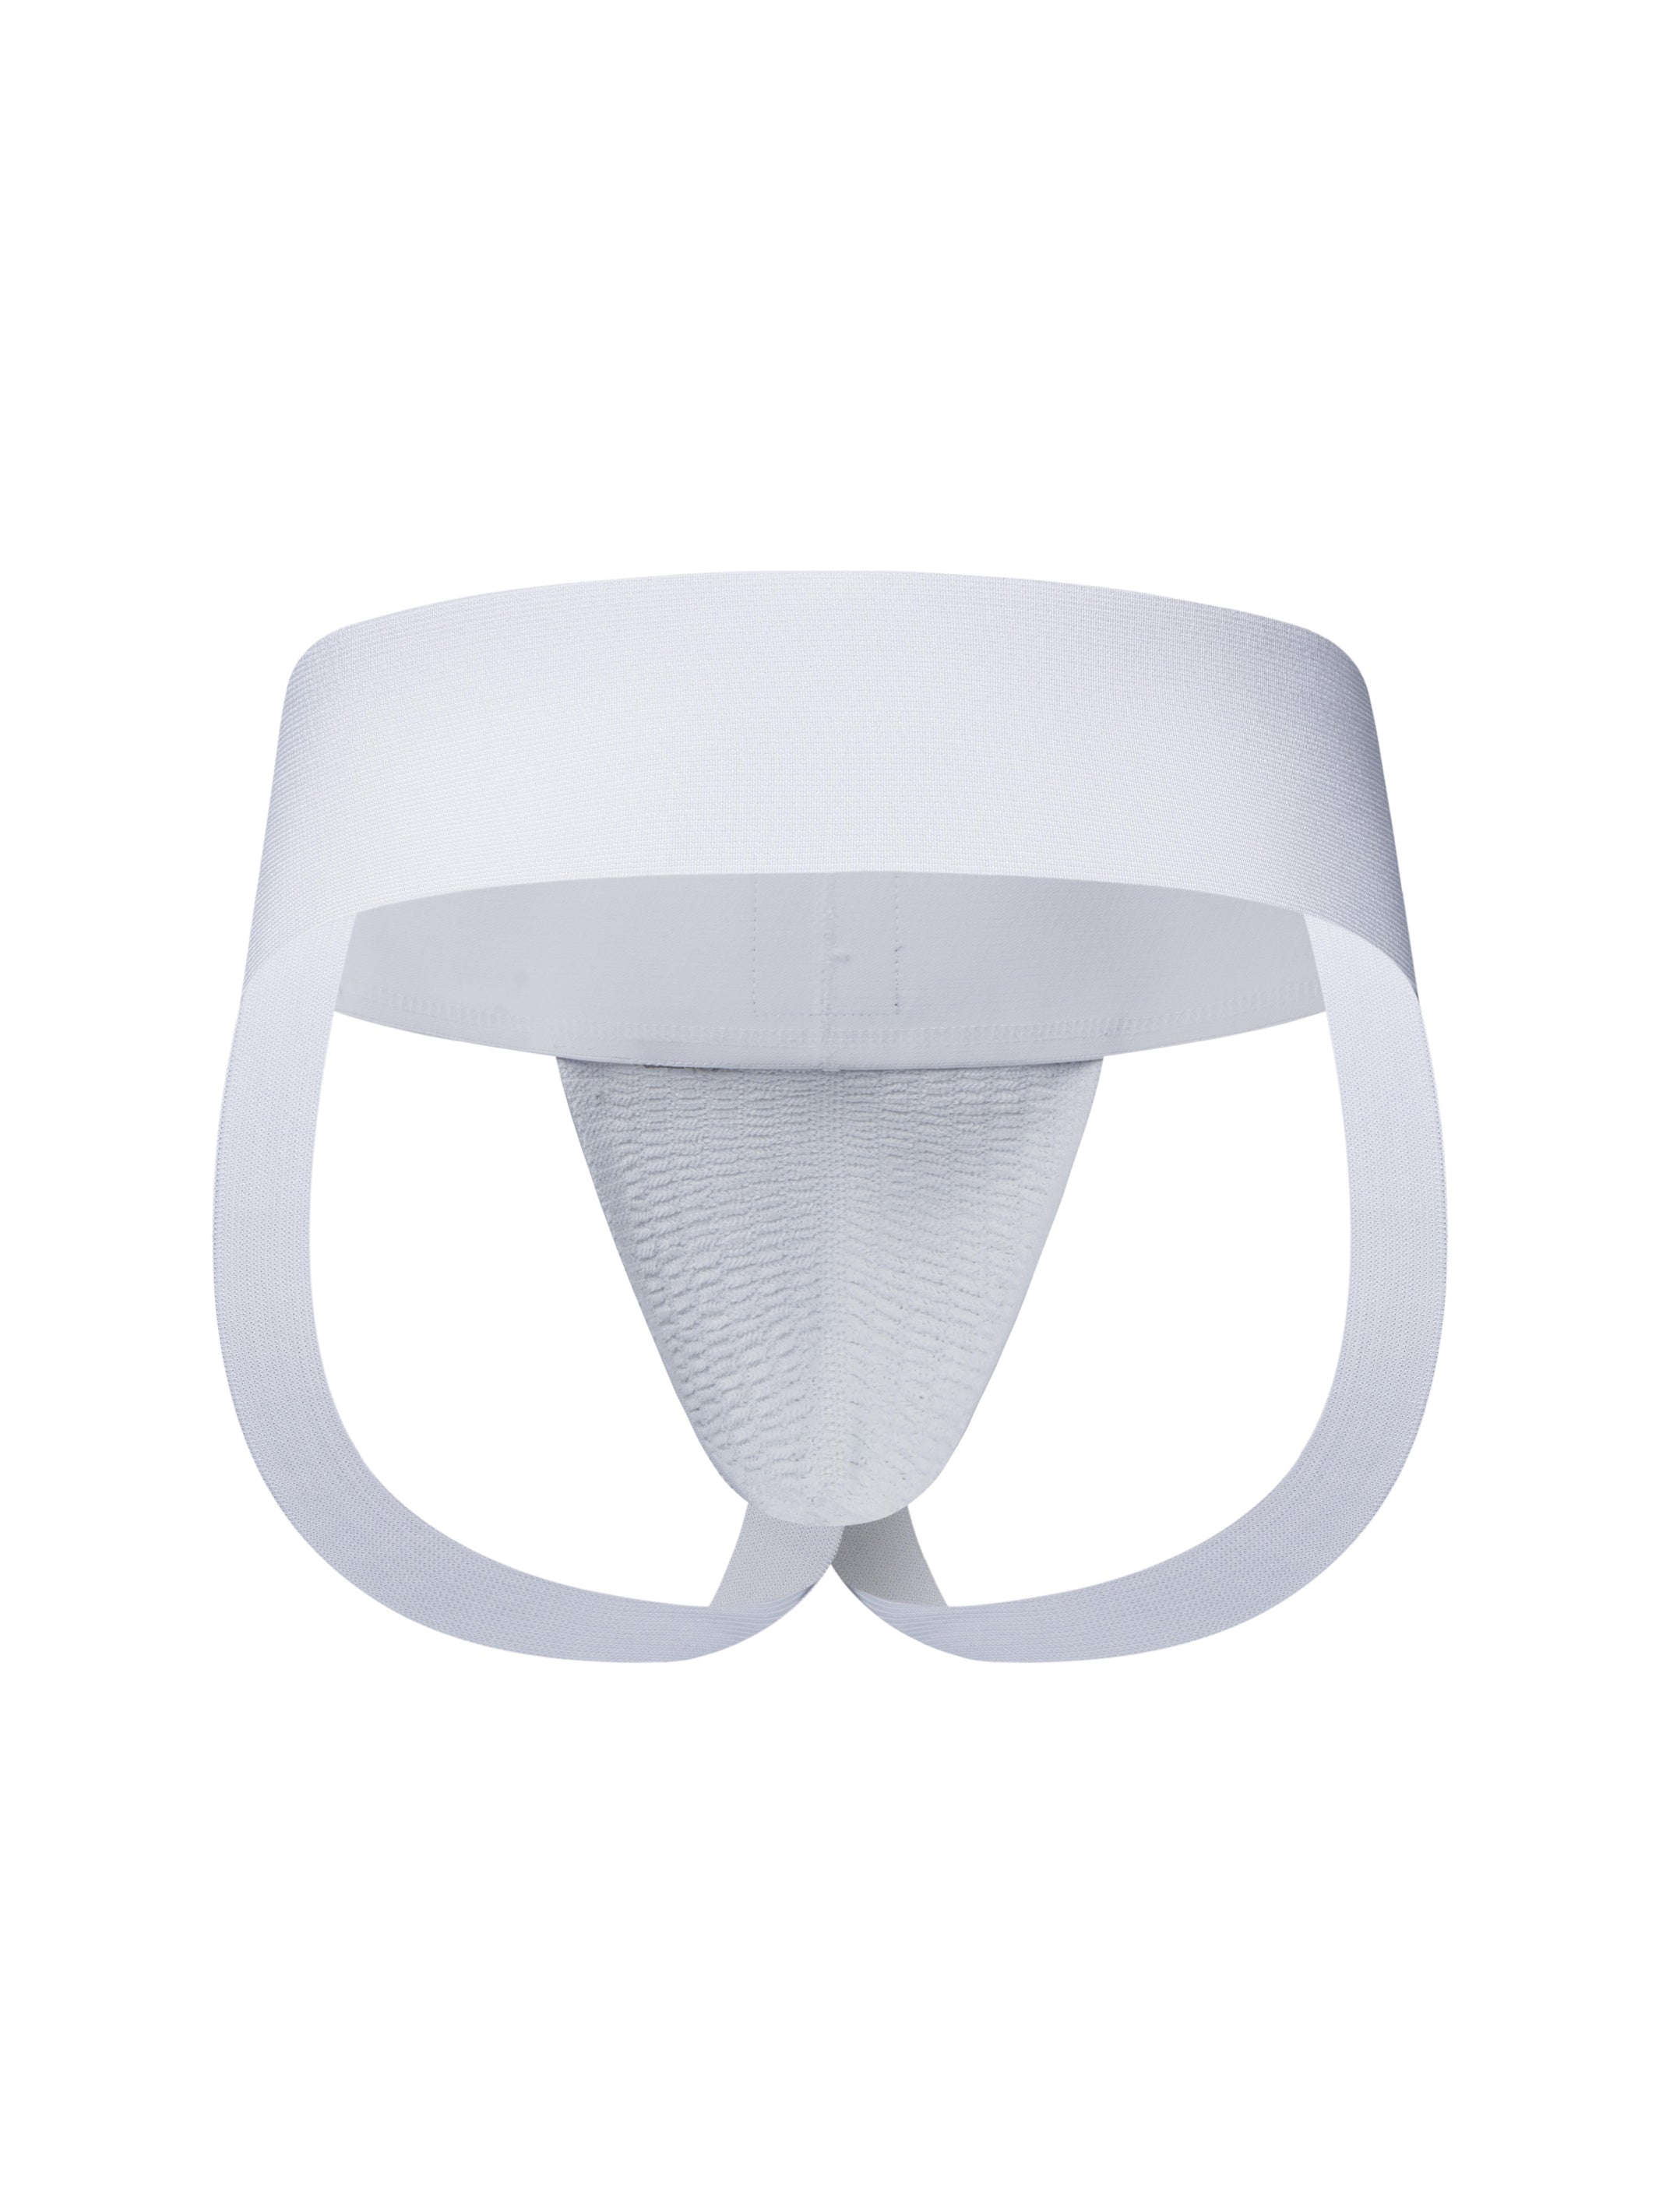 A product photo of the back of a white mesh Locker Jock